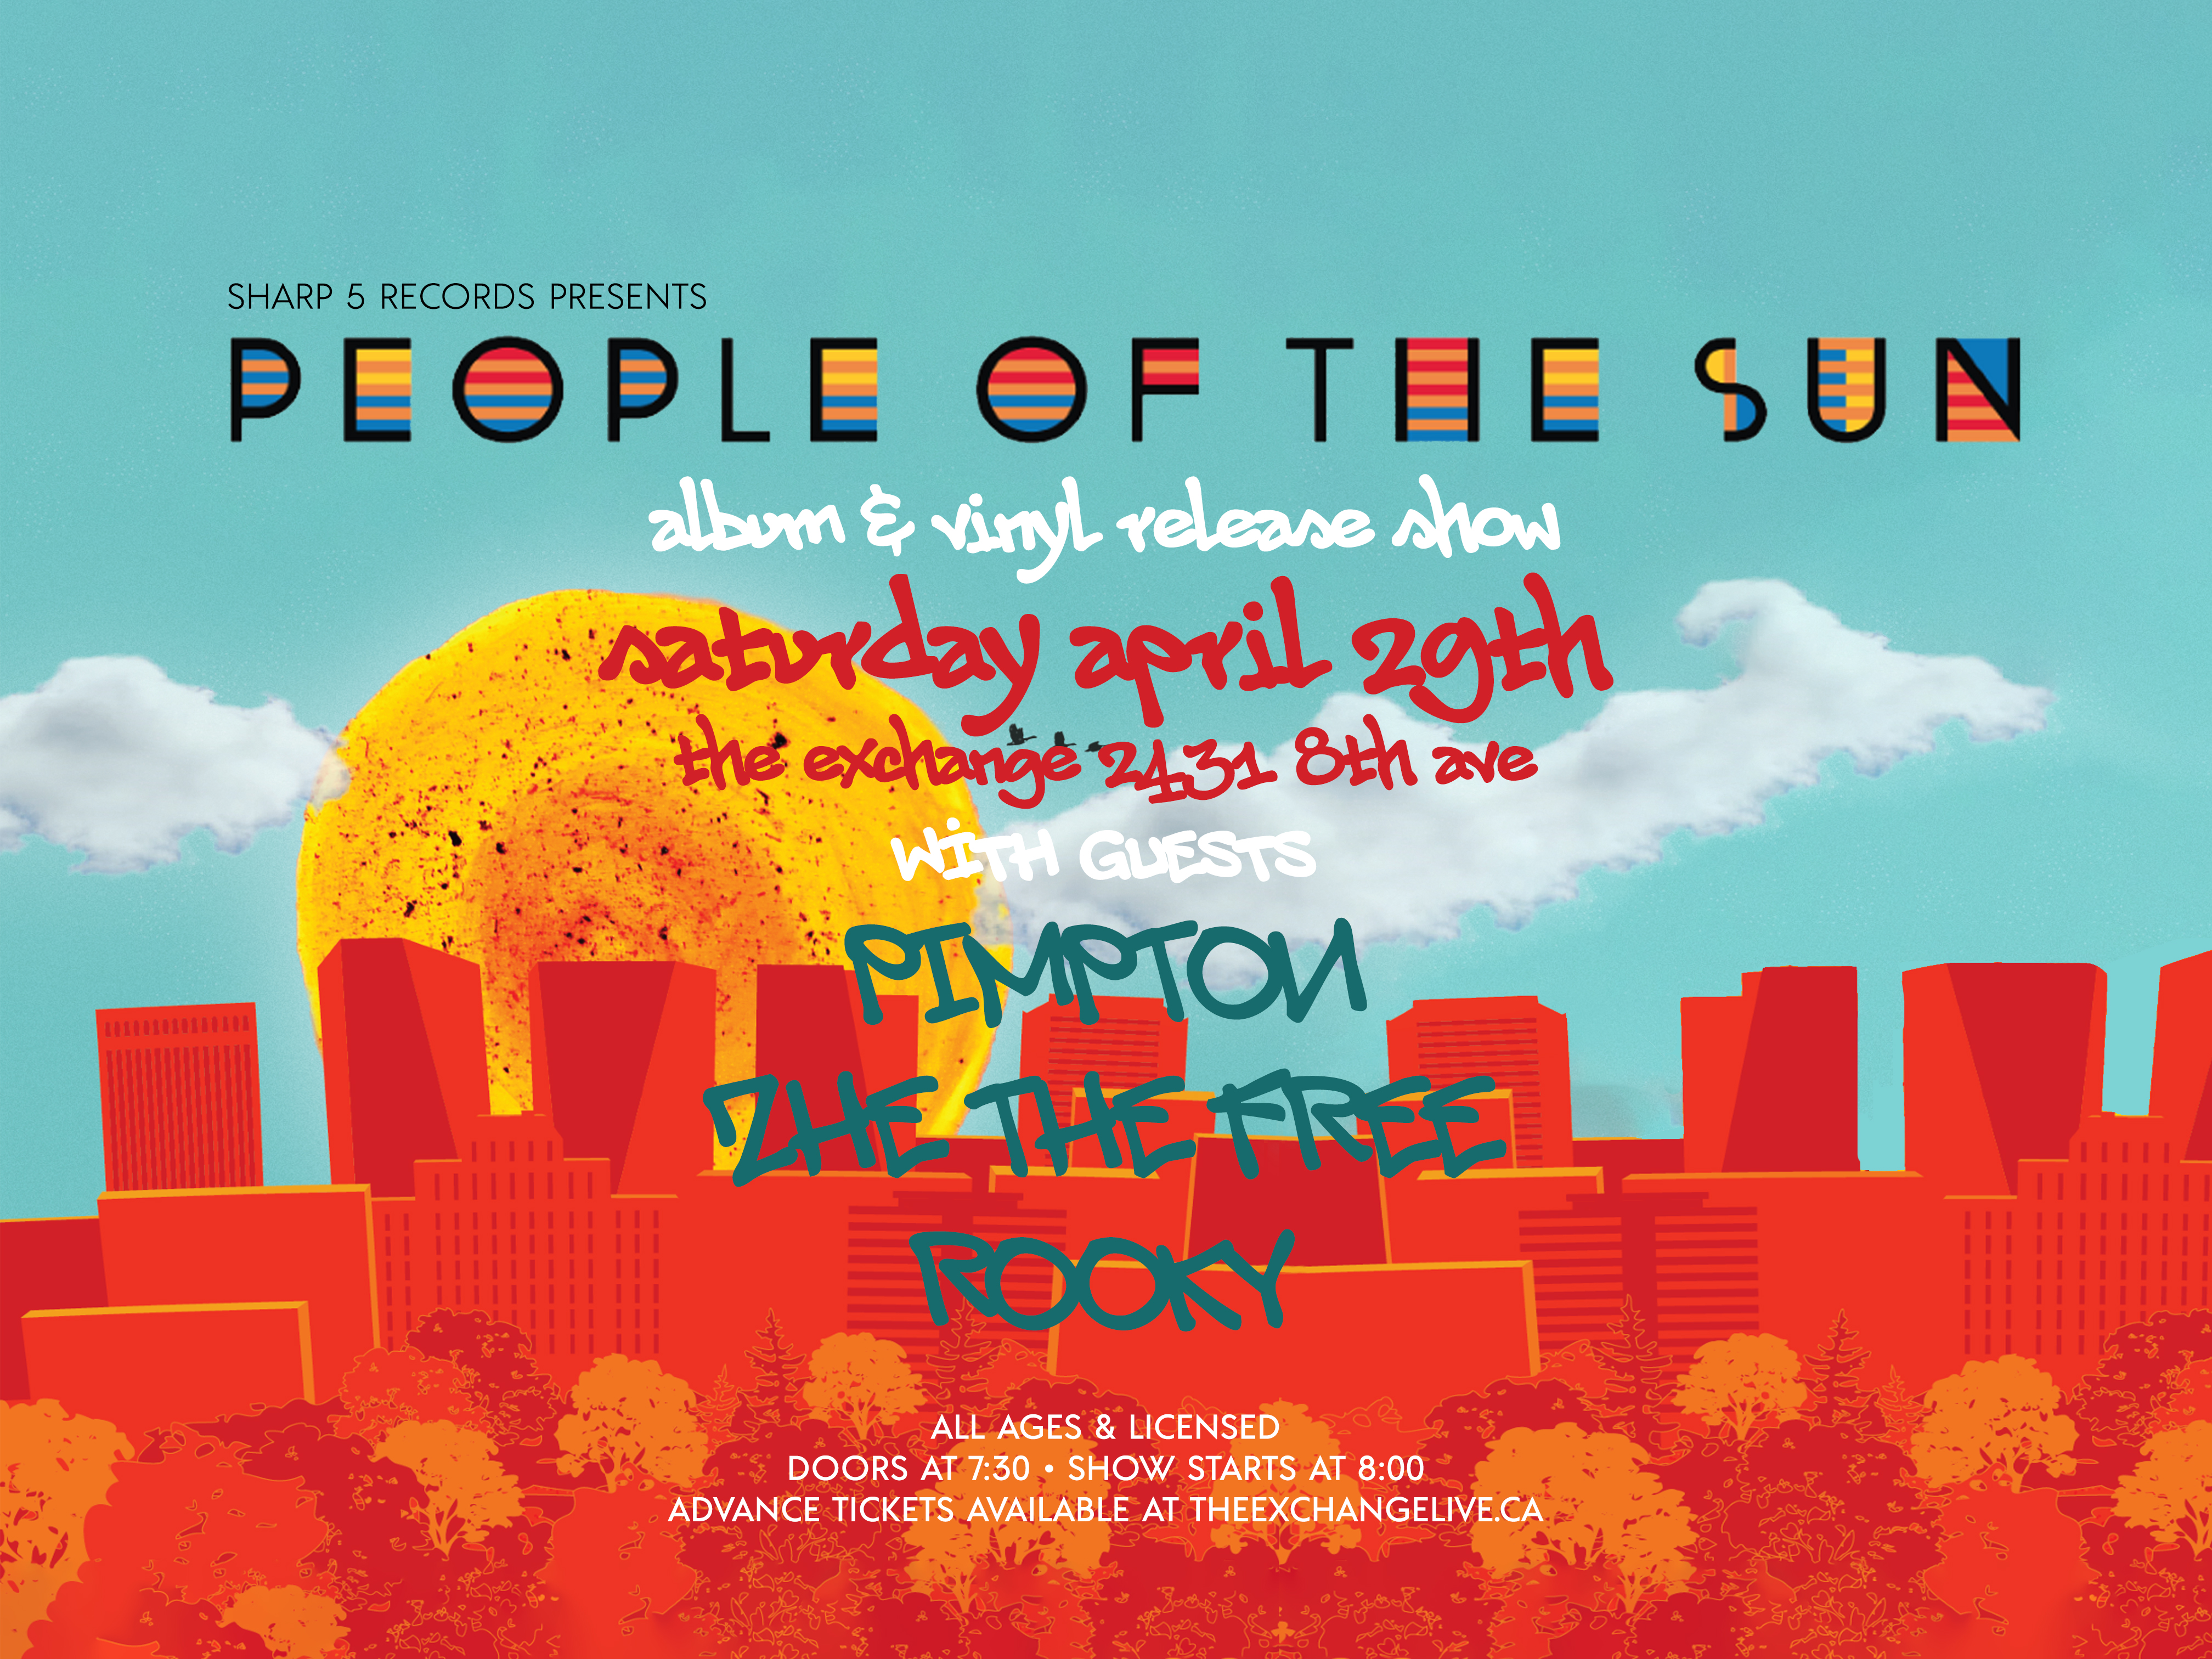 People of the Sun album release show w/Pimpton, ZHE The Free, and Rooky 